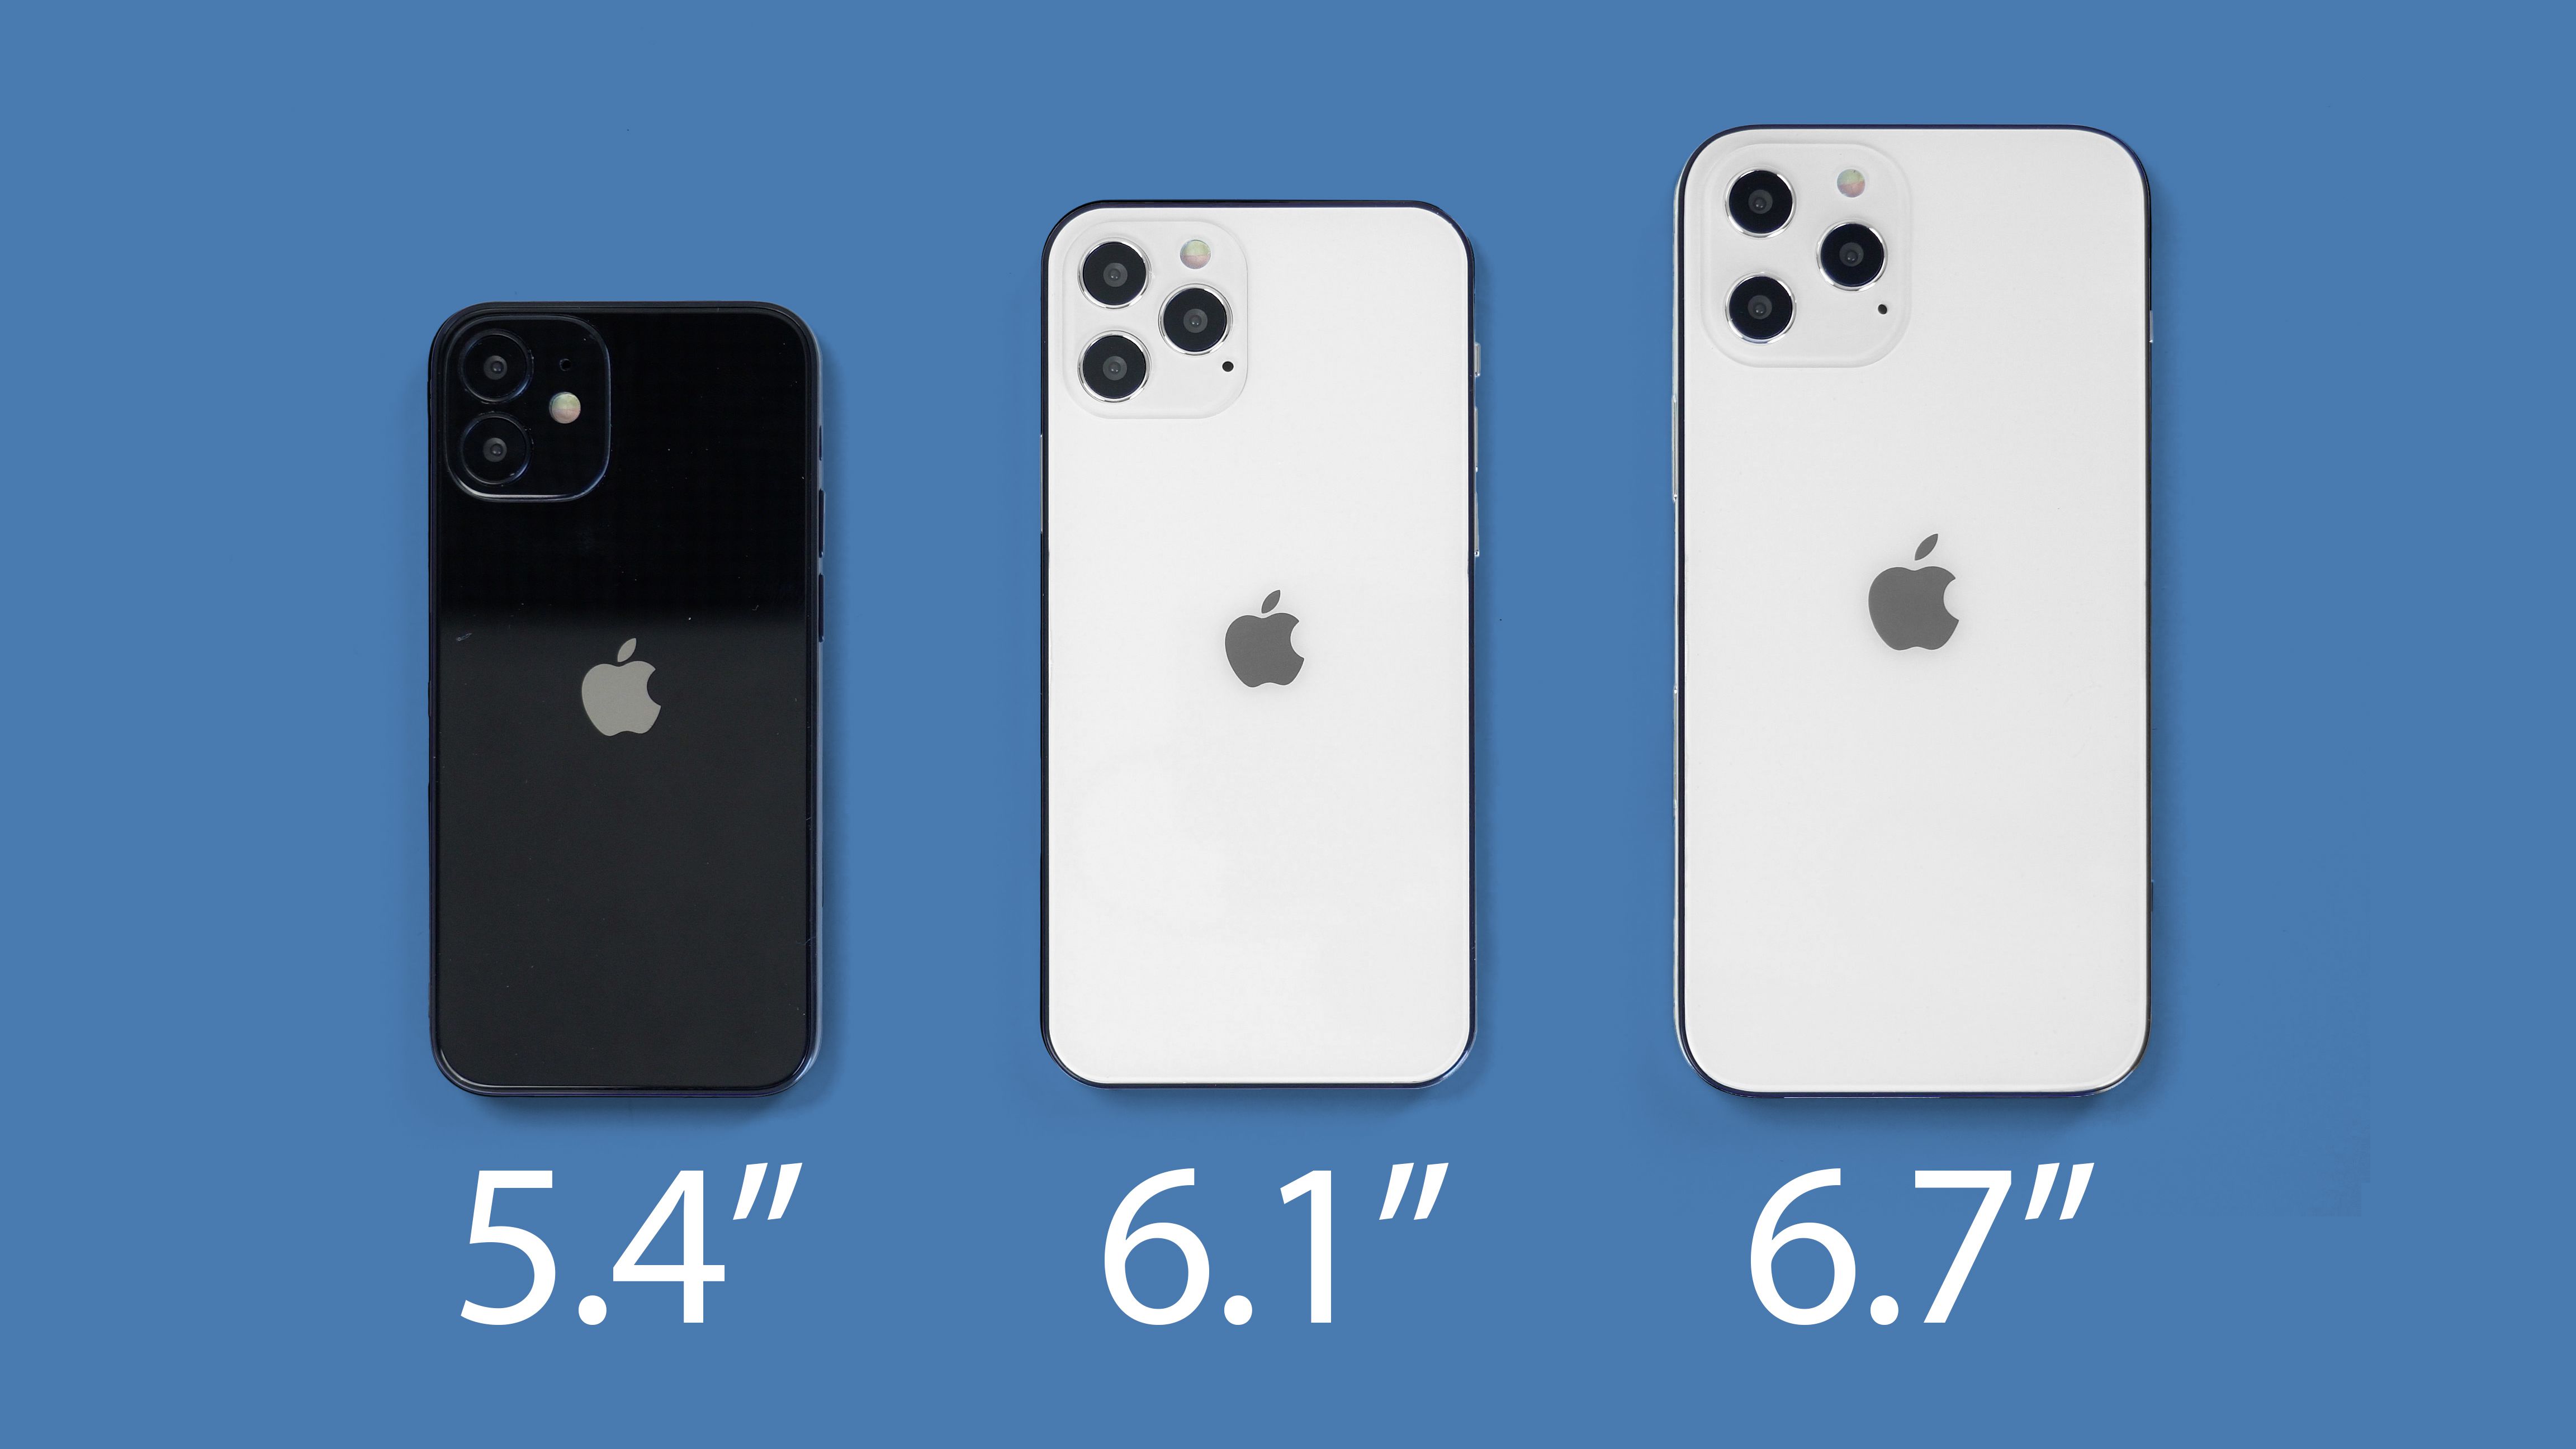 Hands On With Iphone 12 Models Showing New Sizes And Design Macrumors